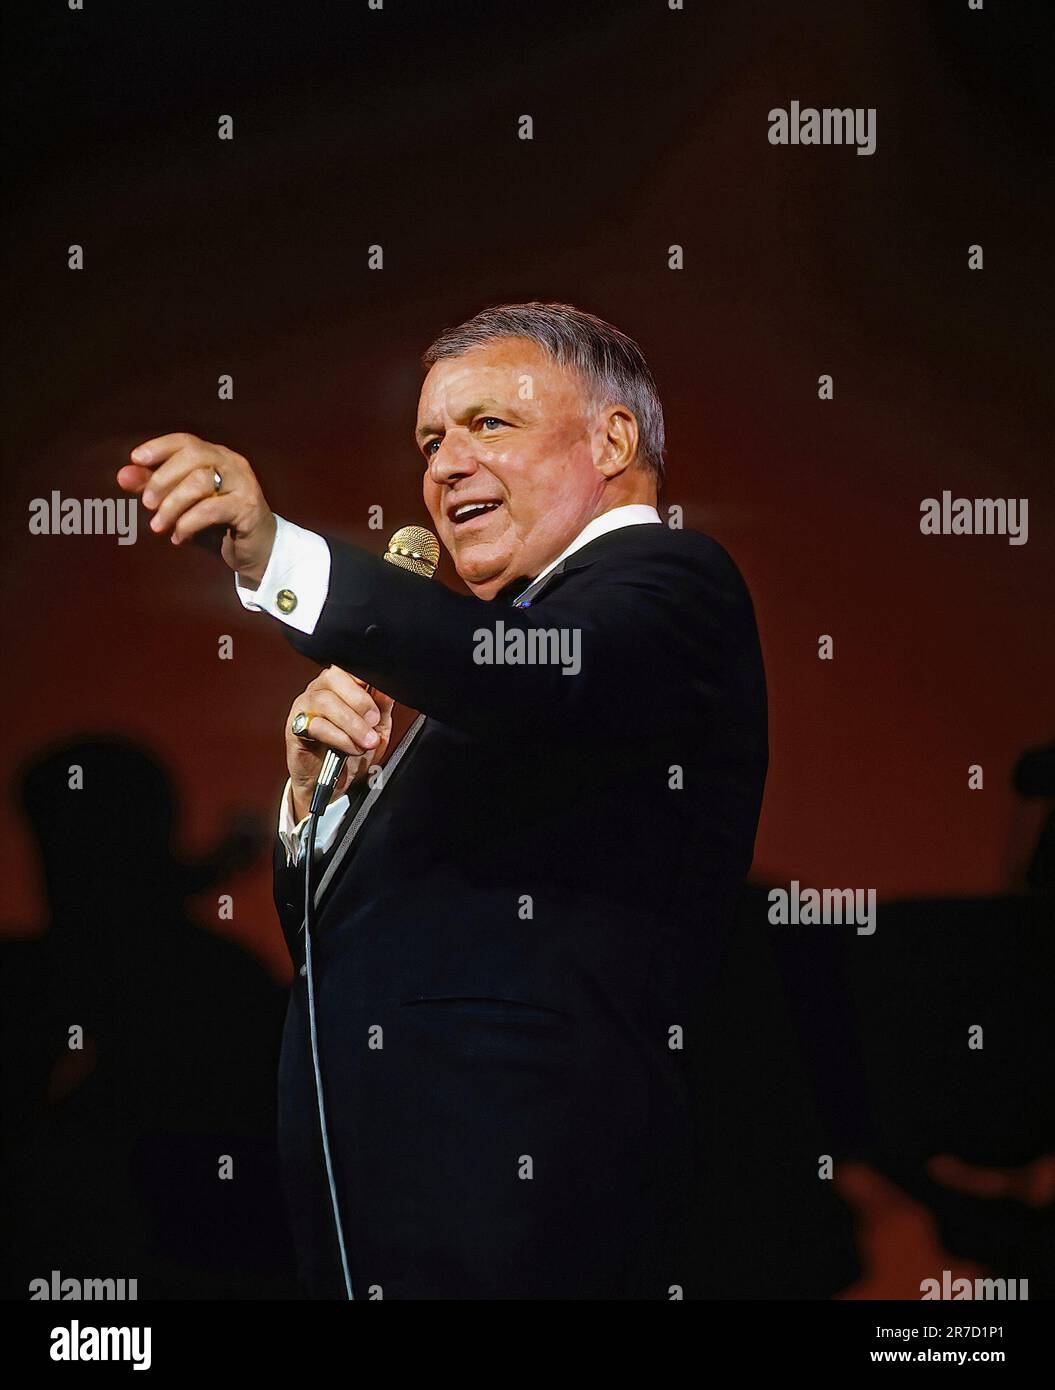 WASHINGTON DC - OCTOBER 1, 1992 Frank Sinatra performs at the gala reopening after a seven million restoration of the Warner theatre in Washington DC. This would turn out to be Sinatra's last performance in Washington. Stock Photo